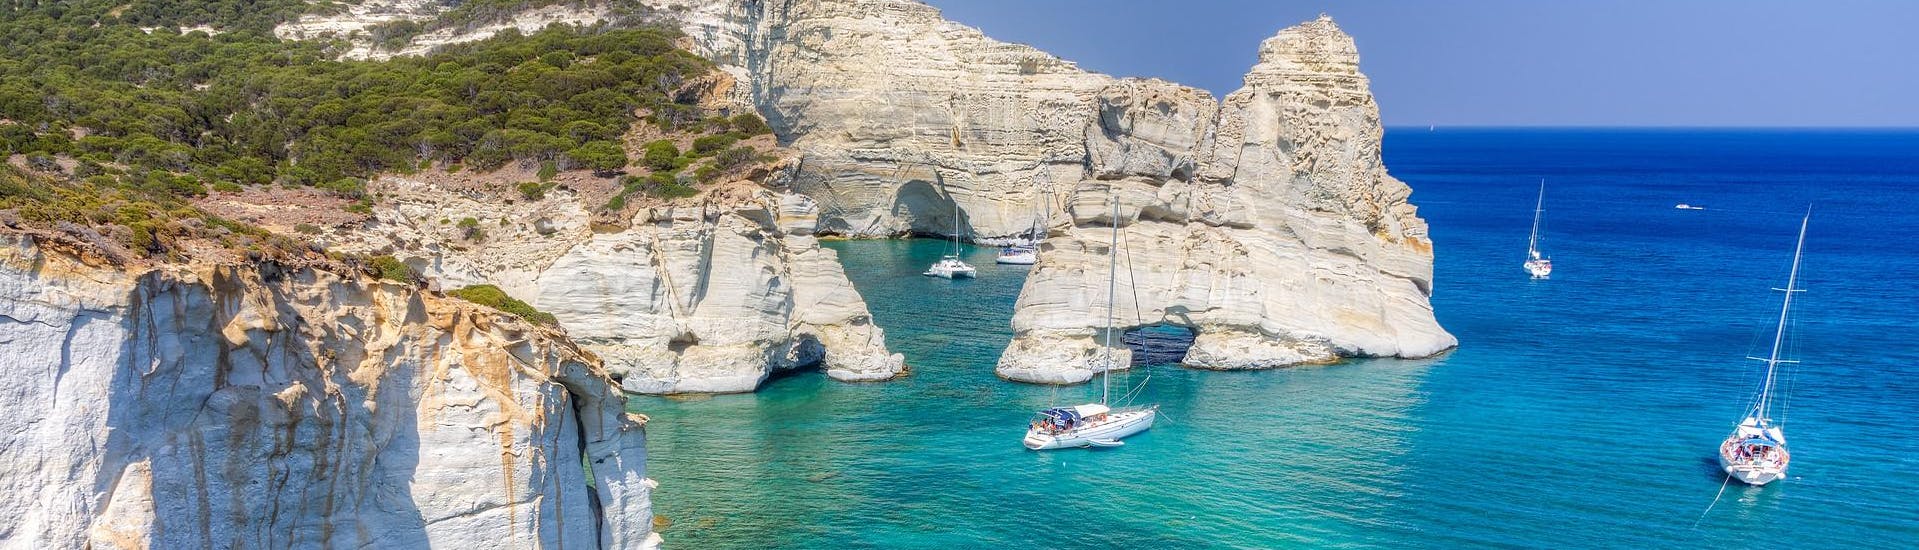 The beautiful rock formations of Kleftiko, that you can admire with a boat trip in Milos.